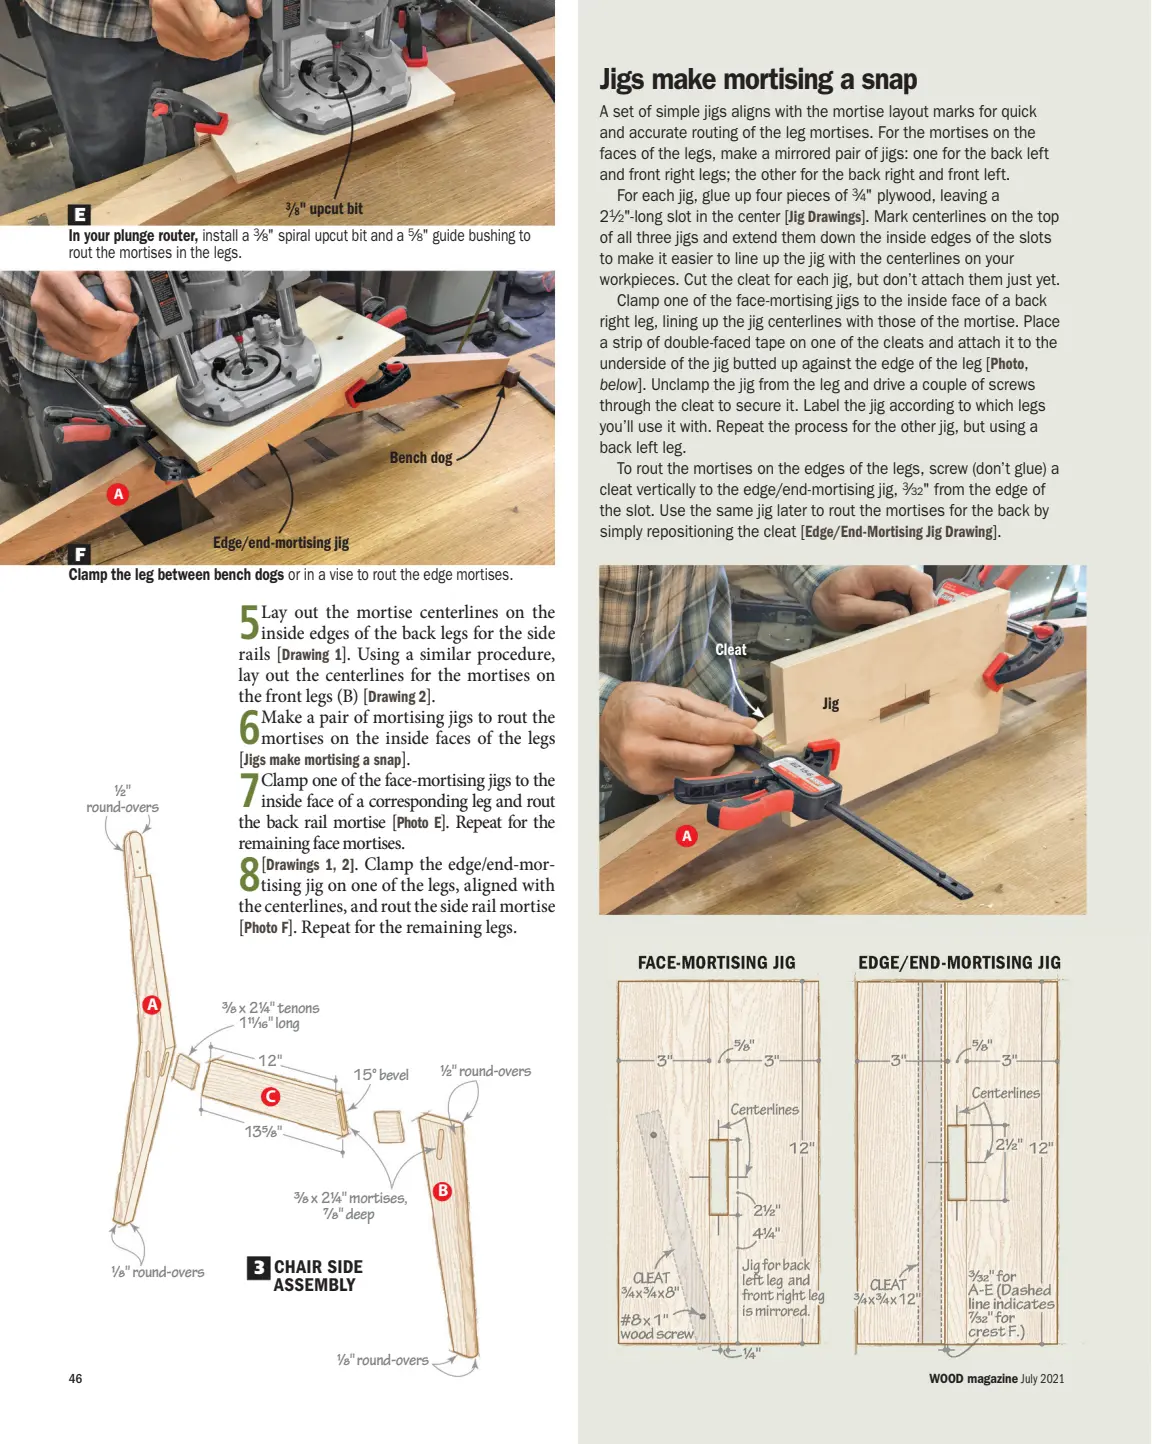  ??  ?? E
In your plunge router, install a rout the mortises in the legs. A 3⁄8" C spiral upcut bit and a
Edge/end-mortising jig
F
Clamp the leg between bench dogs " upcut bit
CHAIR SIDE ASSEMBLY 5⁄8" guide bushing to
Bench dog or in a vise to rout the edge mortises. B 3/ 8 A 3 ½" round-overs 3/8 x 2¼" tenons 111/16" long 12" ½" round-overs 15° bevel 135/8" 3/8 x 2¼" mortises, 7/8" deep 1/8" round-overs 1/8" round-overs